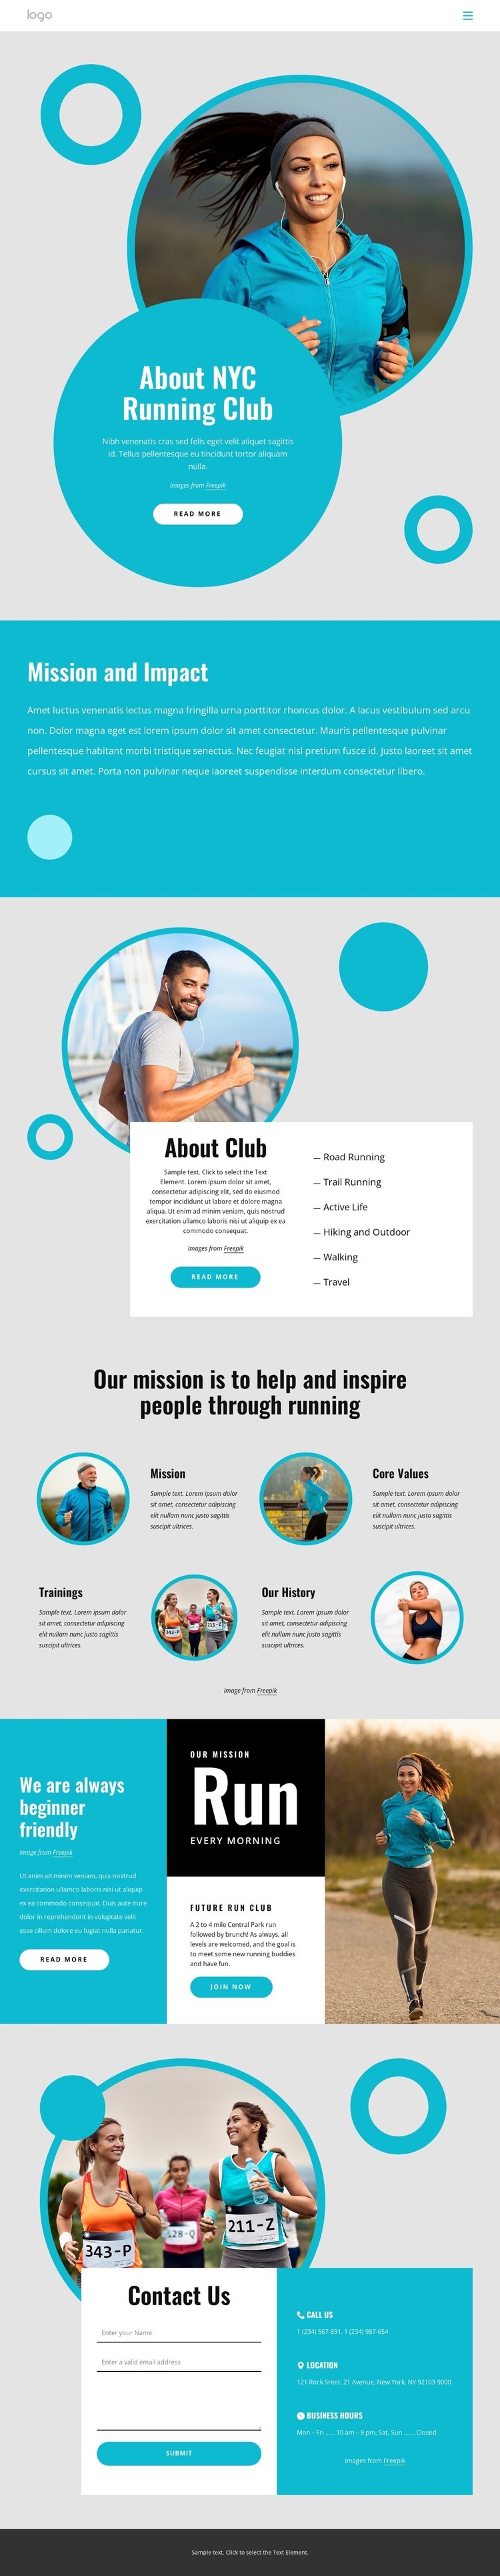 About NYC running club Homepage Design